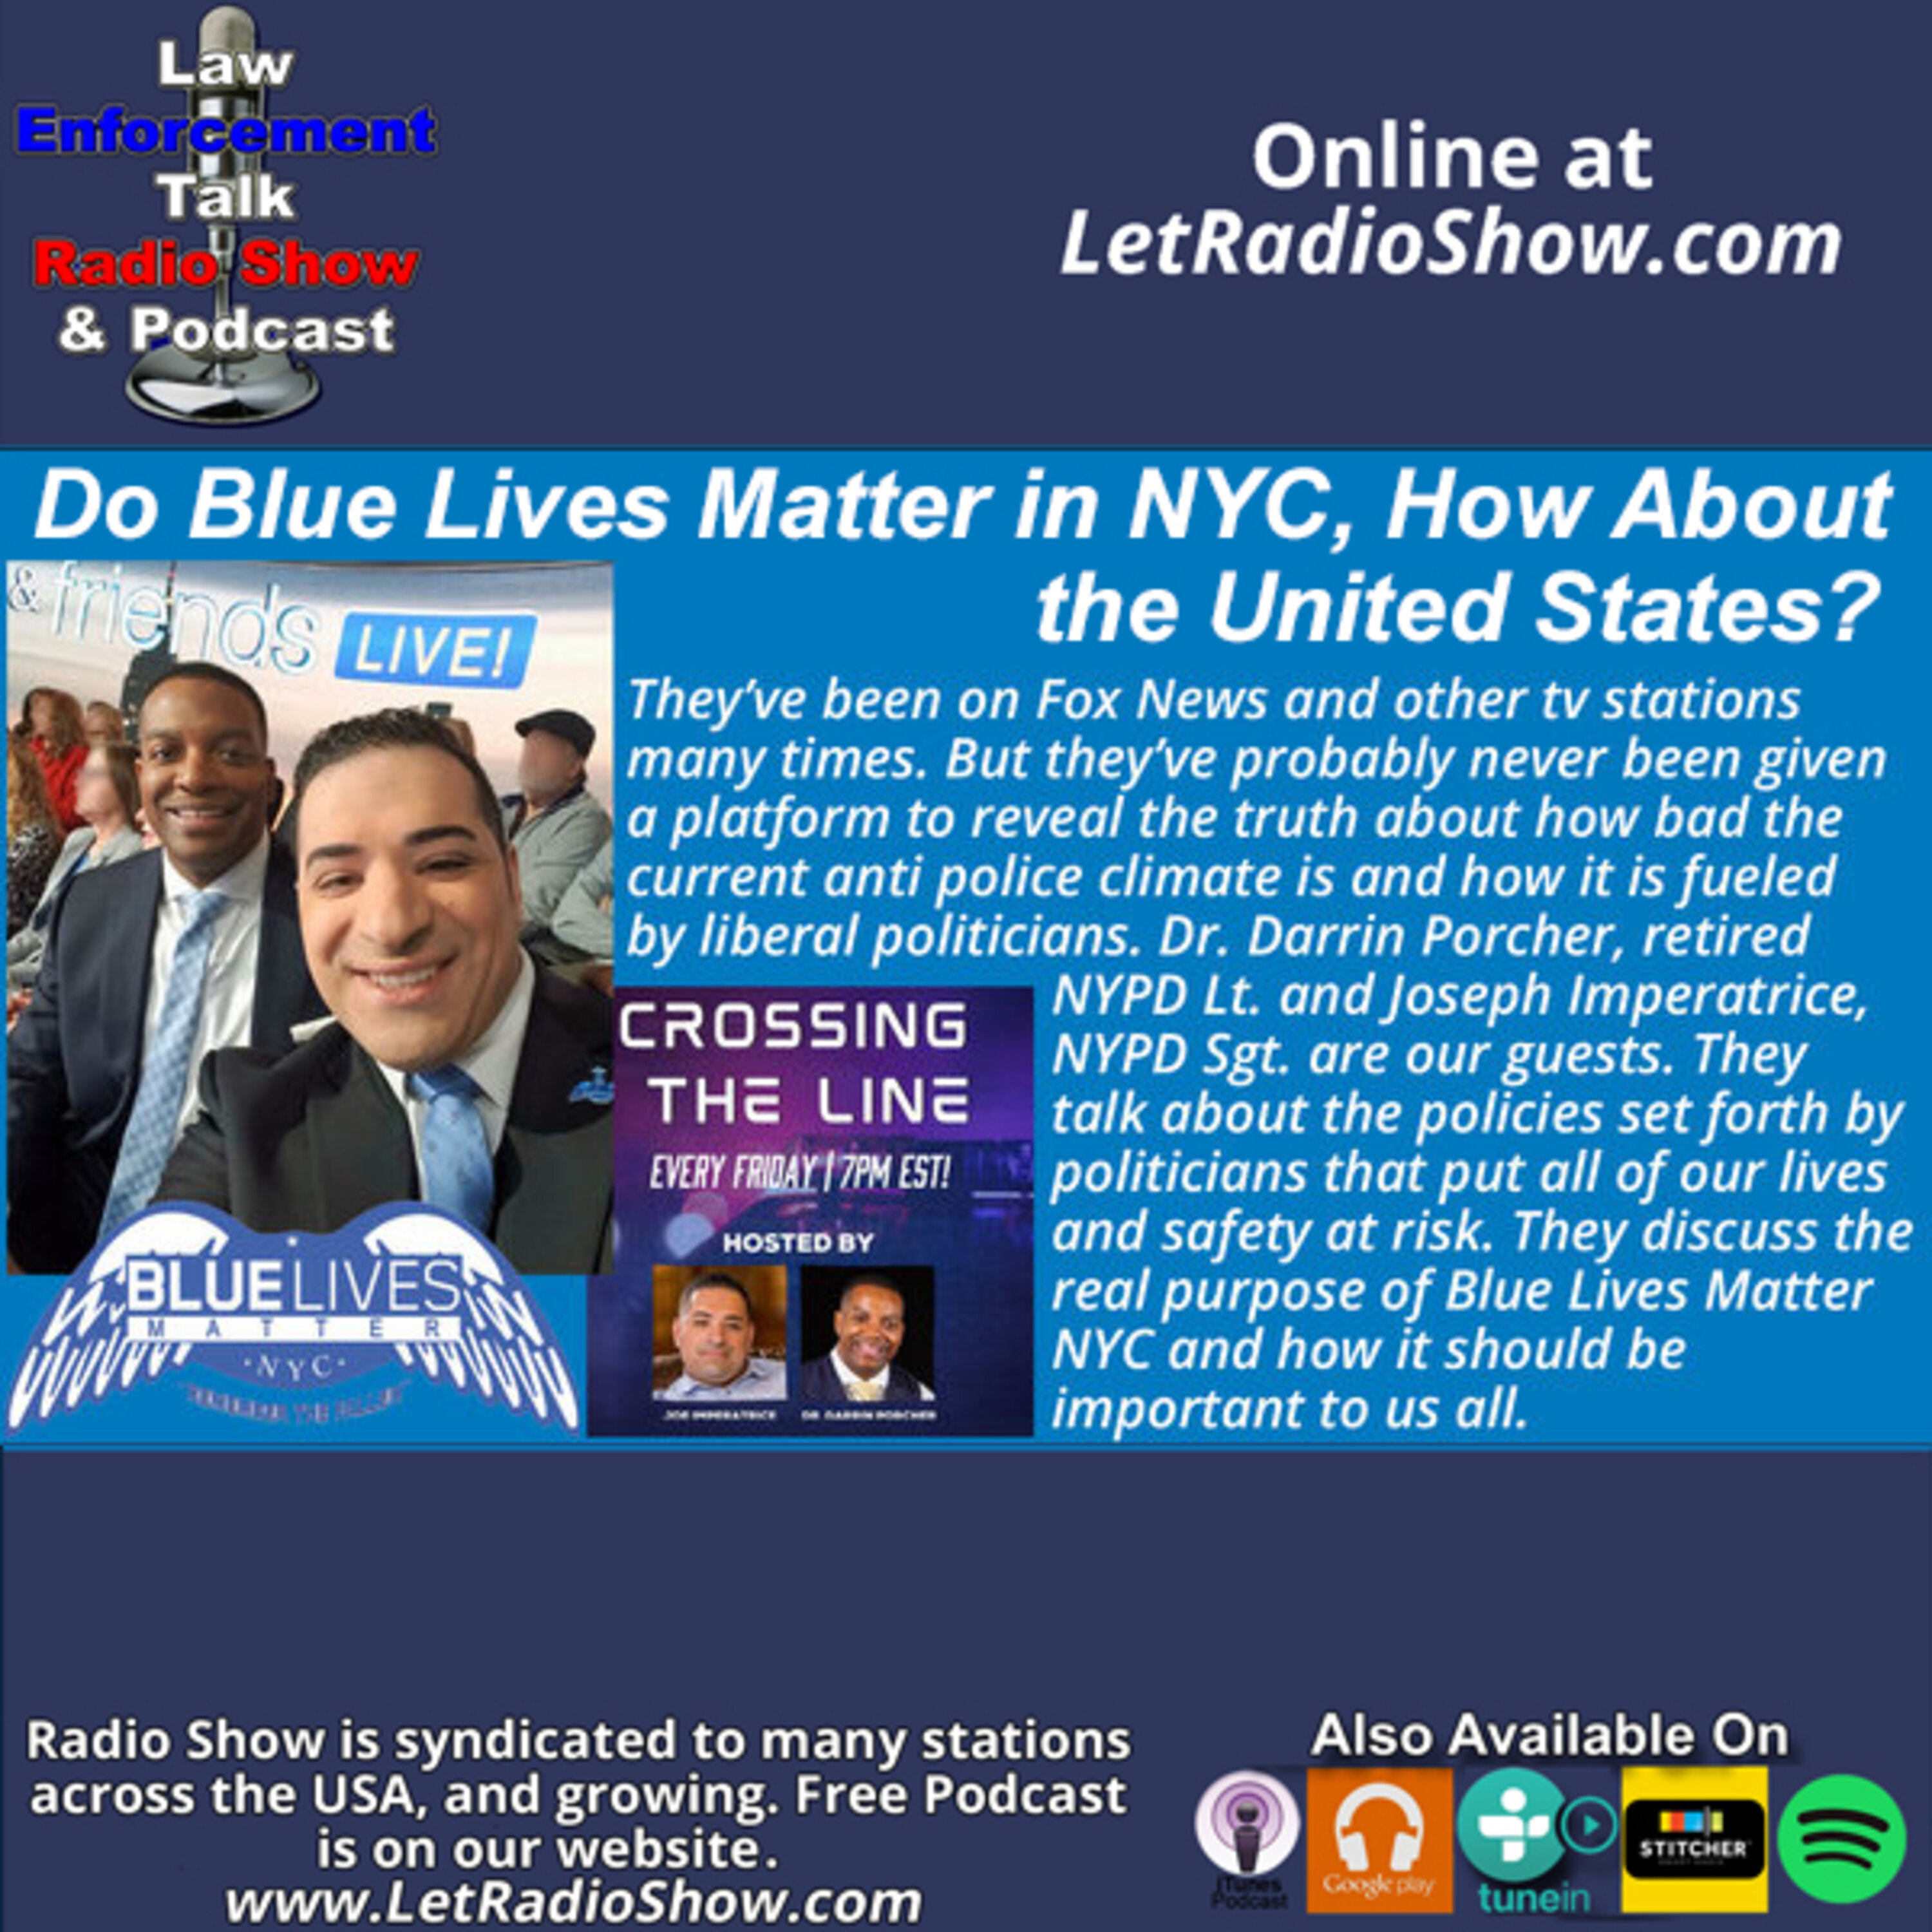 Do Blue Lives Matter in NYC, How About the United States? Special Episode.